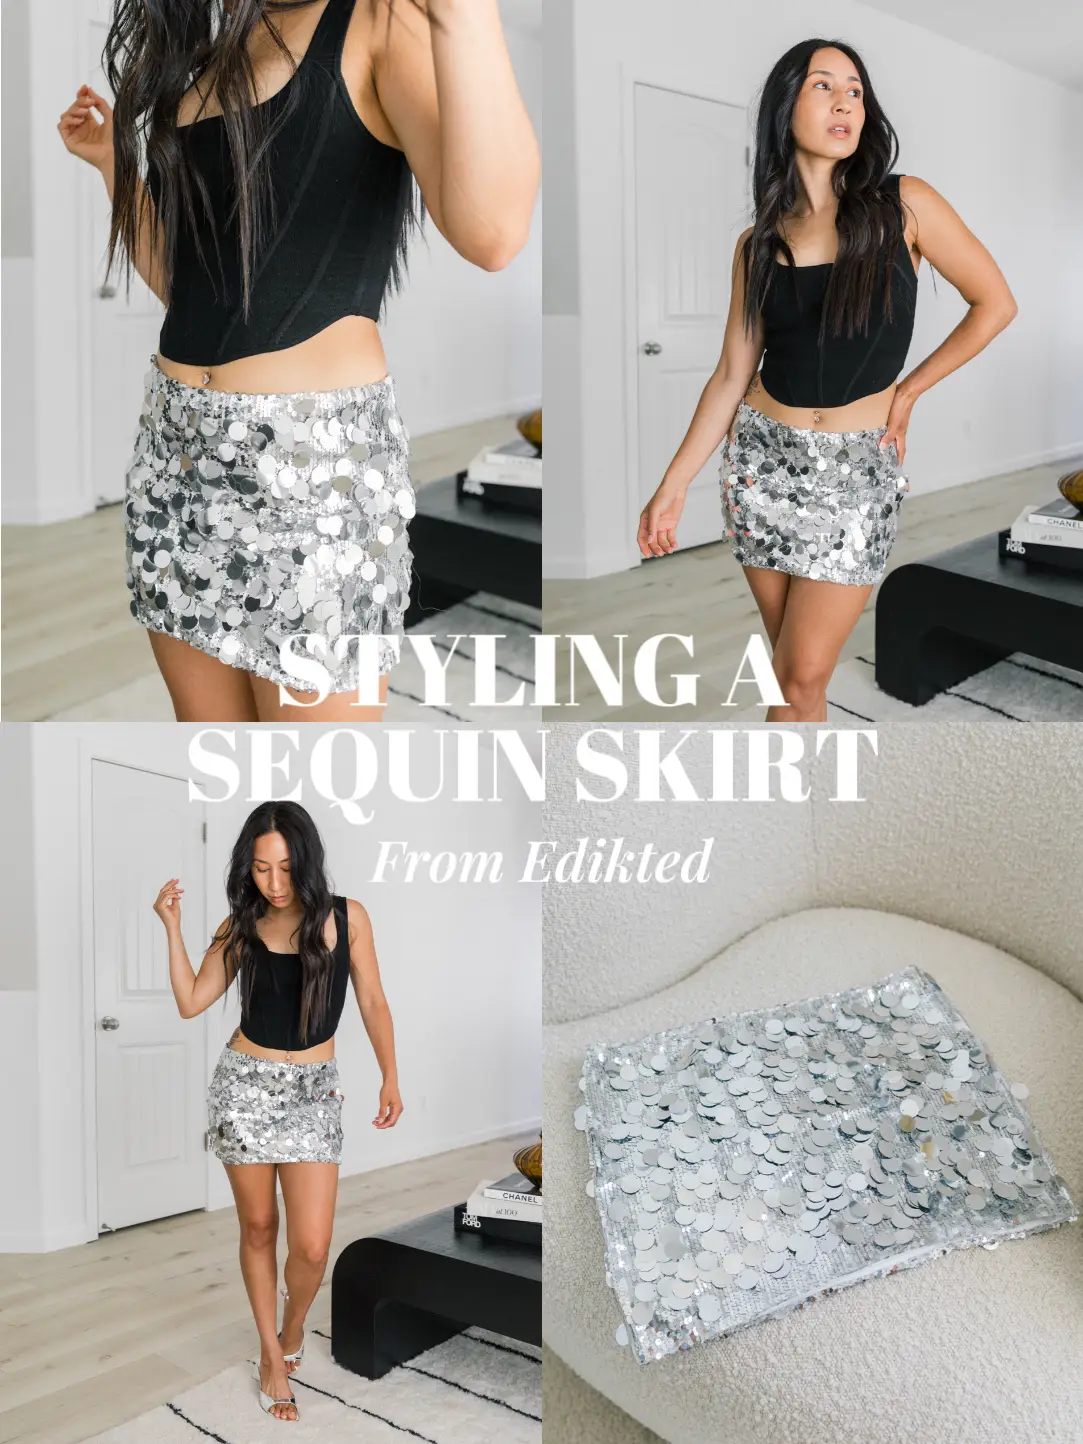 How to Style a Sequin Skirt